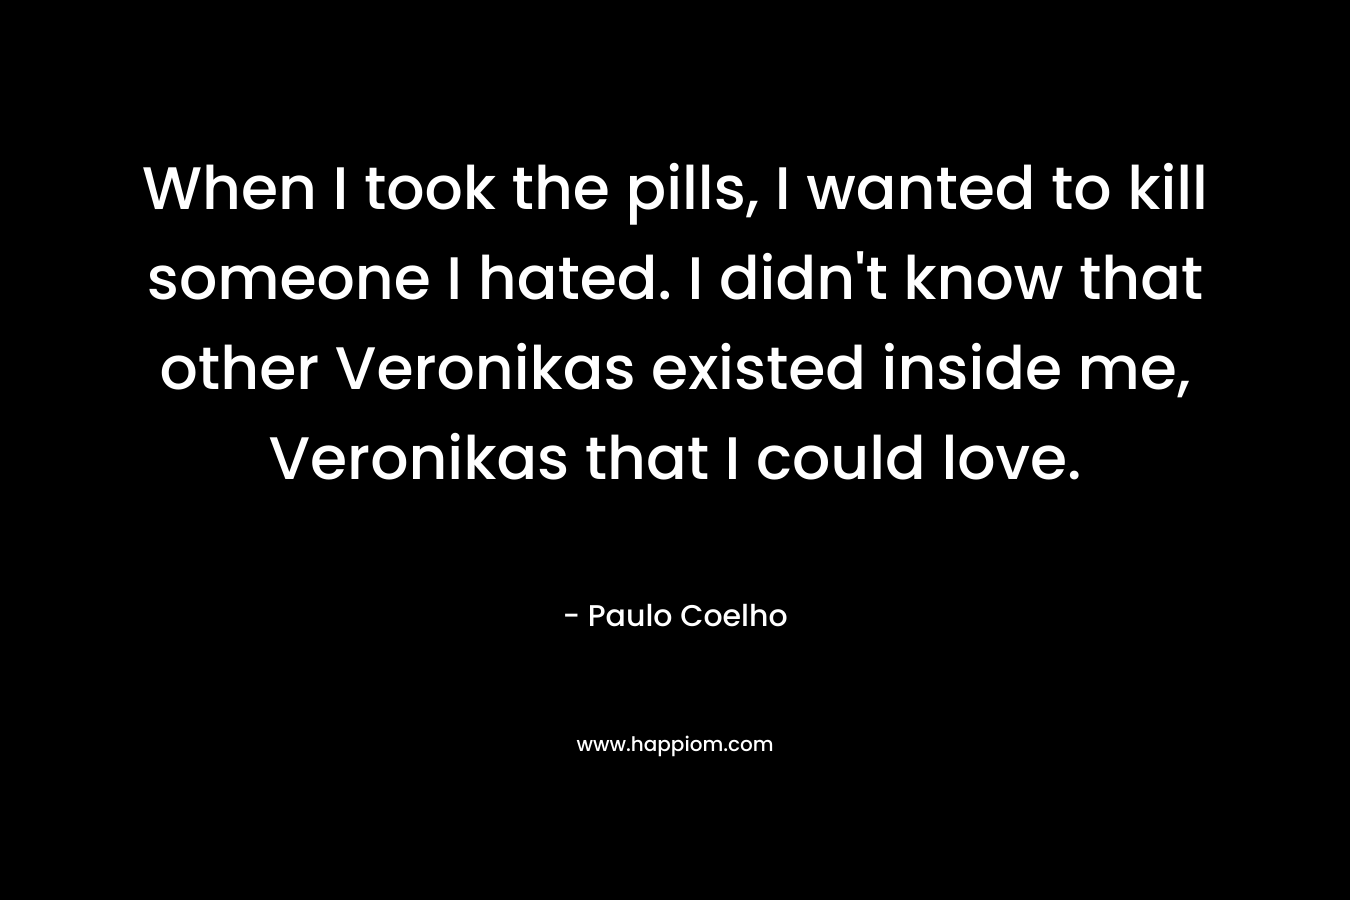 When I took the pills, I wanted to kill someone I hated. I didn’t know that other Veronikas existed inside me, Veronikas that I could love. – Paulo Coelho